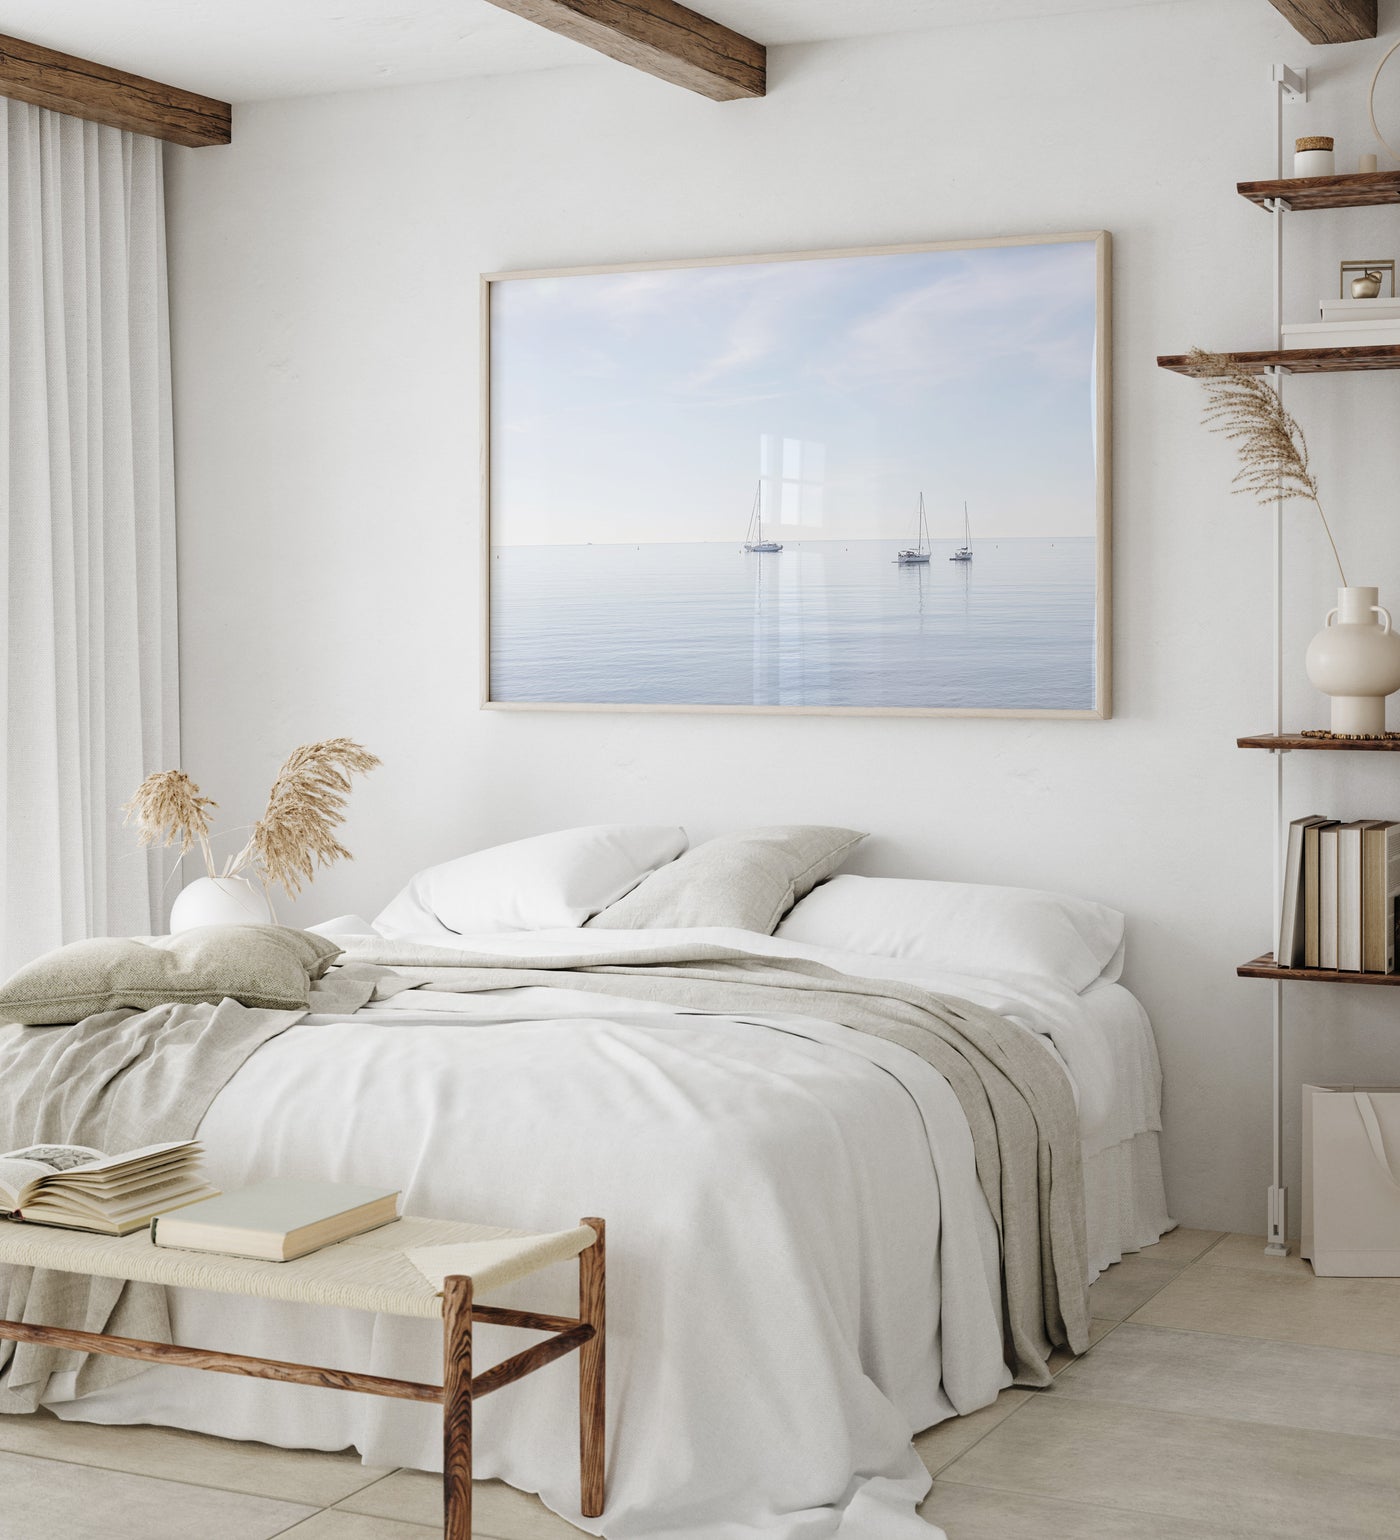 Boats No 6 - Fine art print by Cattie Coyle Photography in bedroom